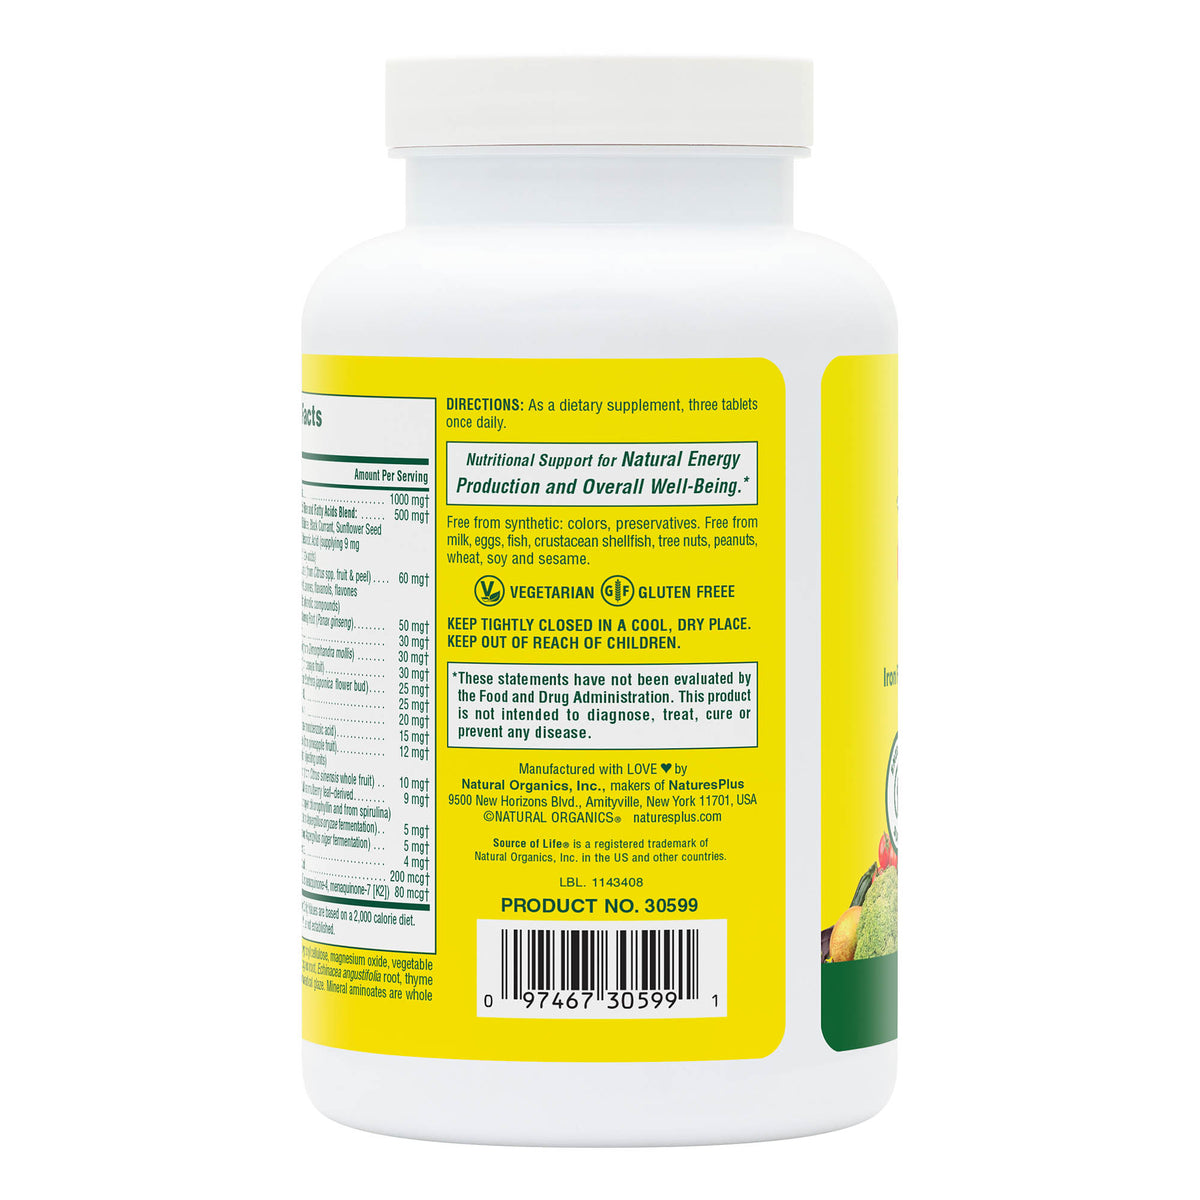 product image of Source of Life® No-Iron Multivitamin Tablets containing 180 Count